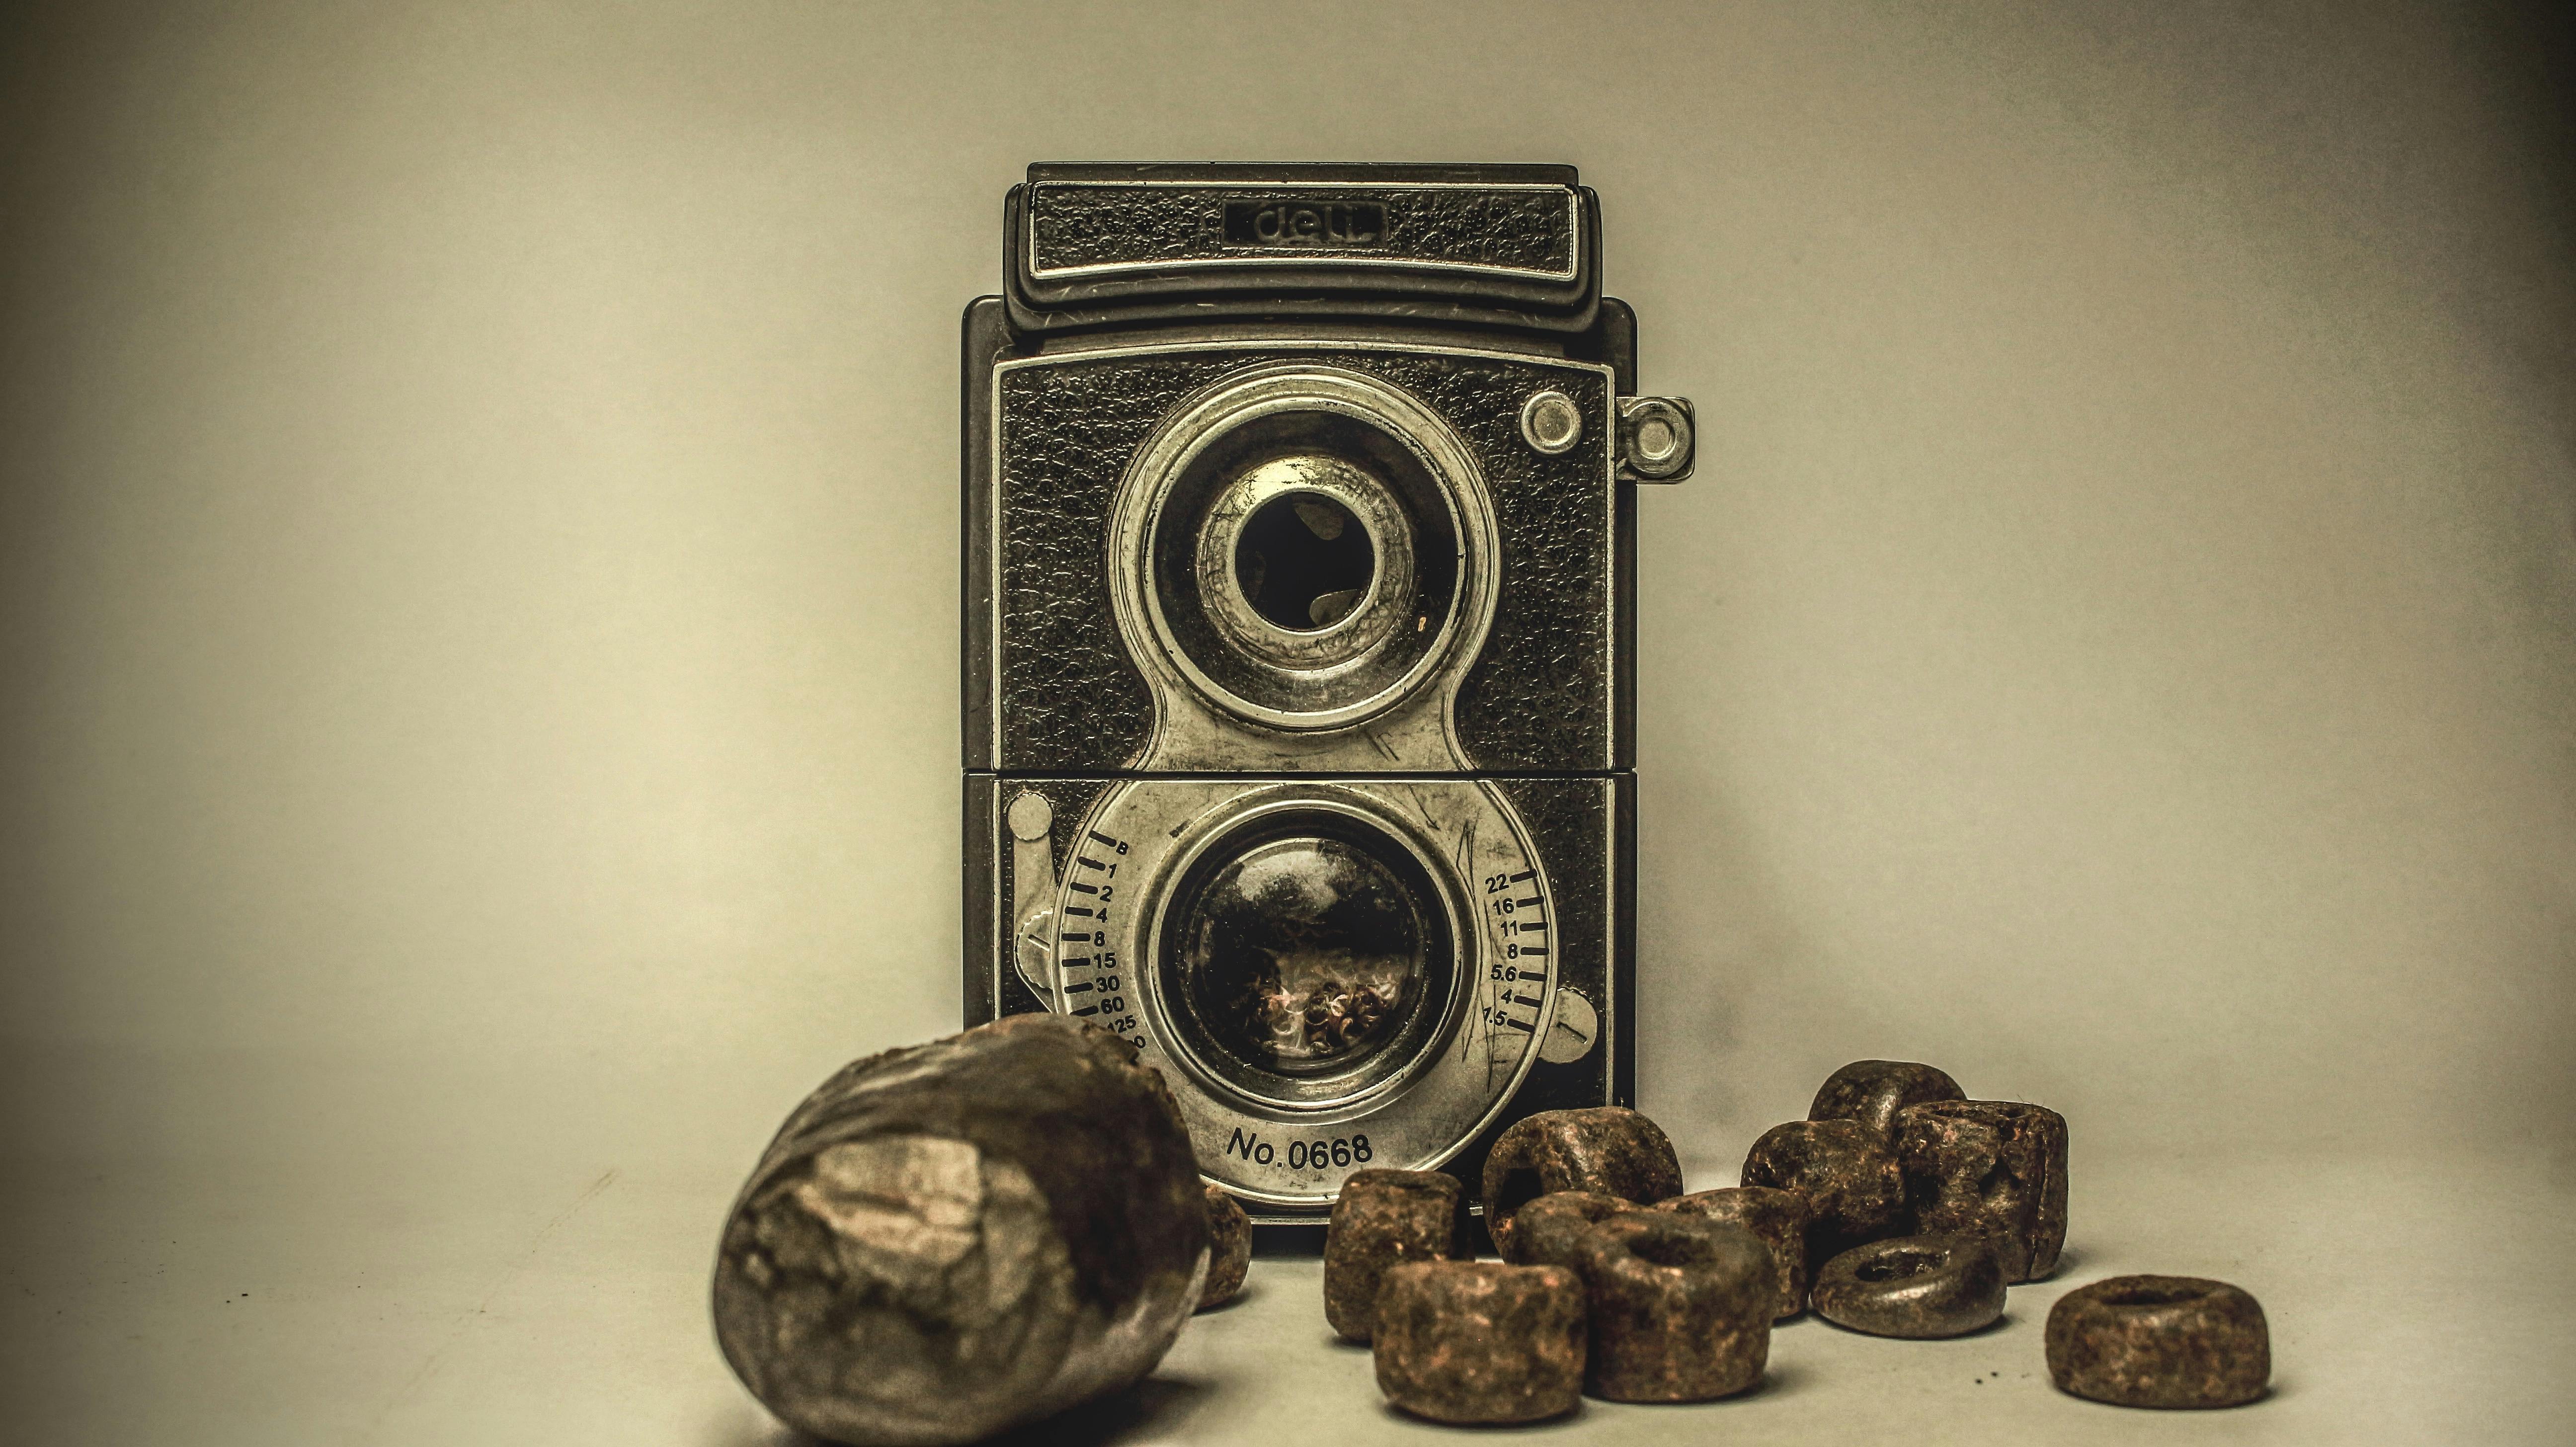 Free stock photo of camera, old camera, Old Pencil Cutter